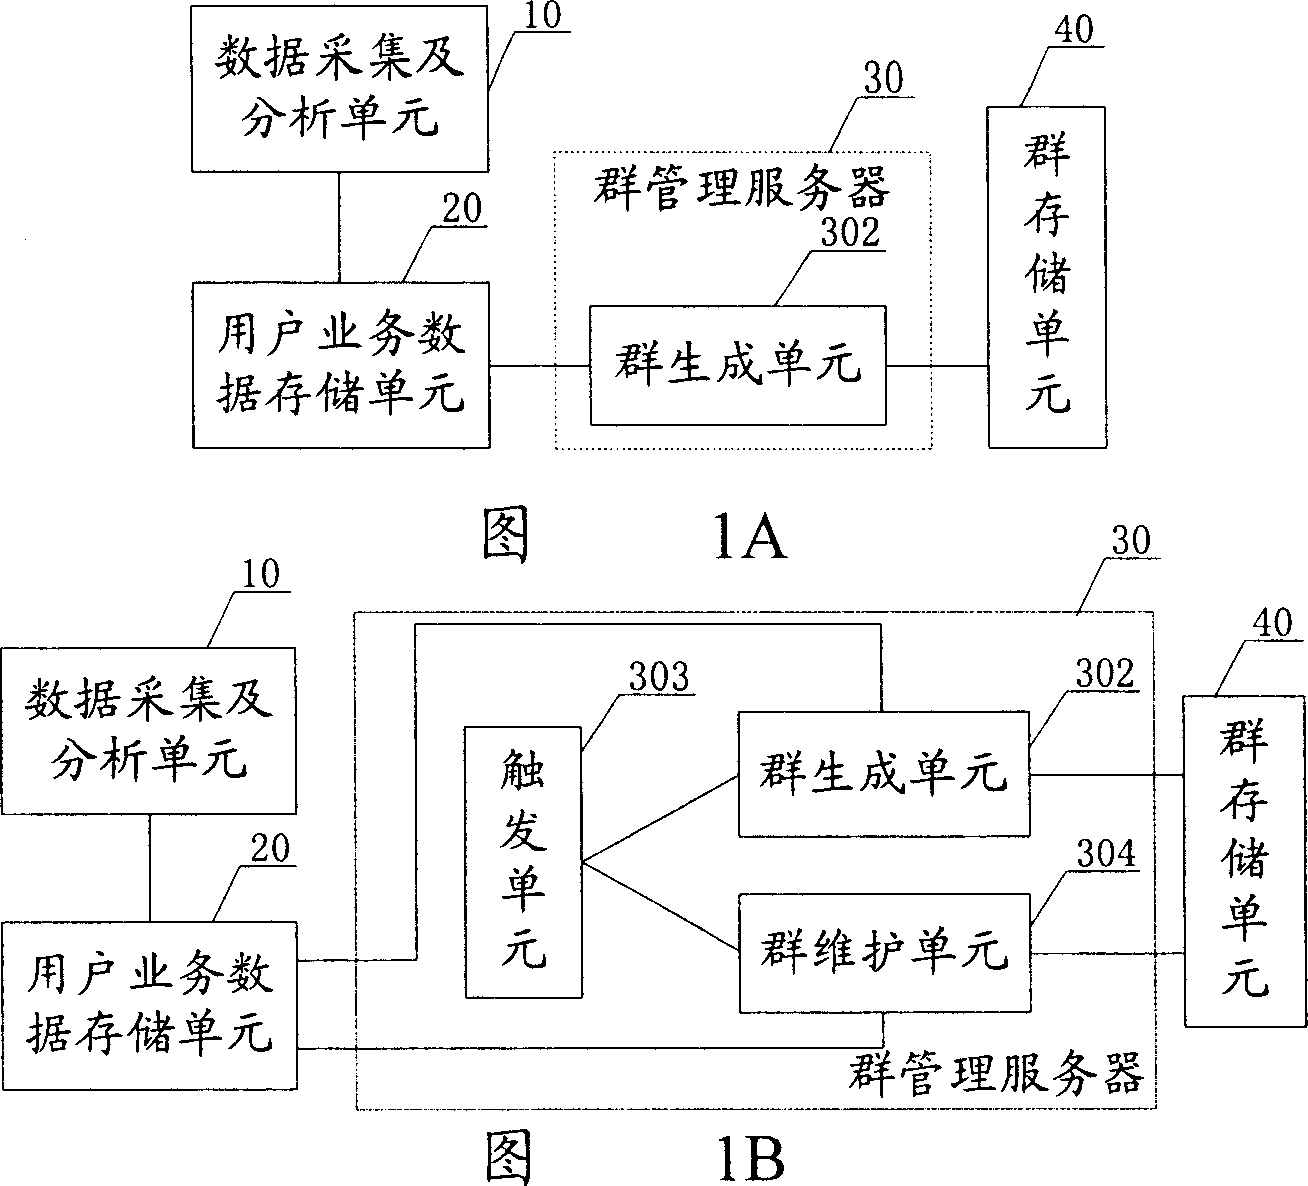 Method and device for forming user group based on user service data